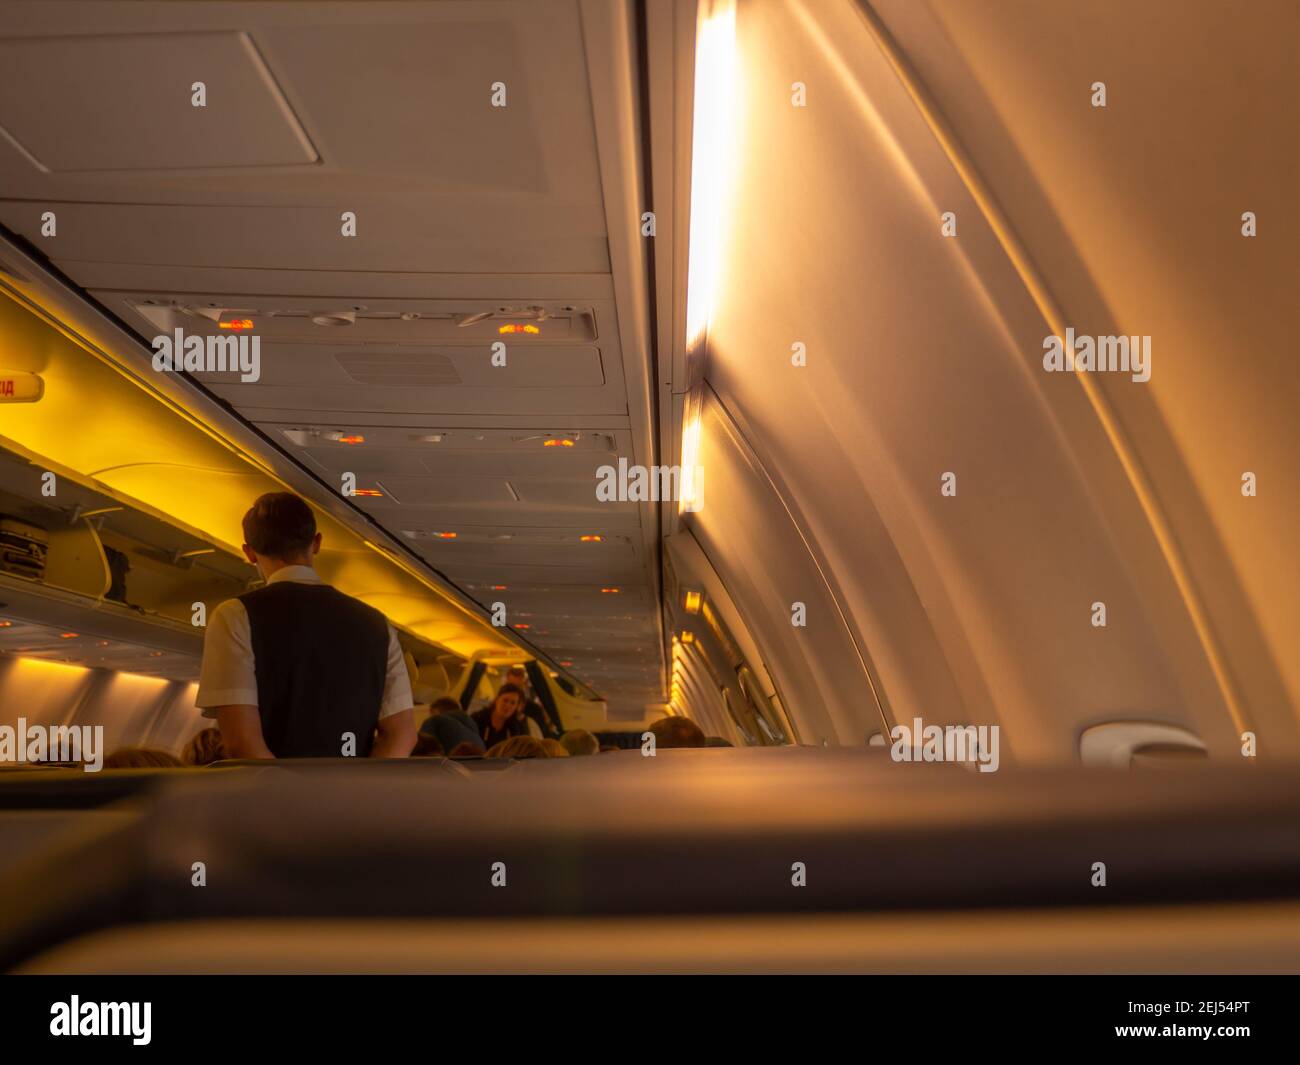 Stewart standing in the aisle of an airplane aircraft cabin. Overhead baggage rack opened and yellow lights turned on. View from the passenger seat. Stock Photo